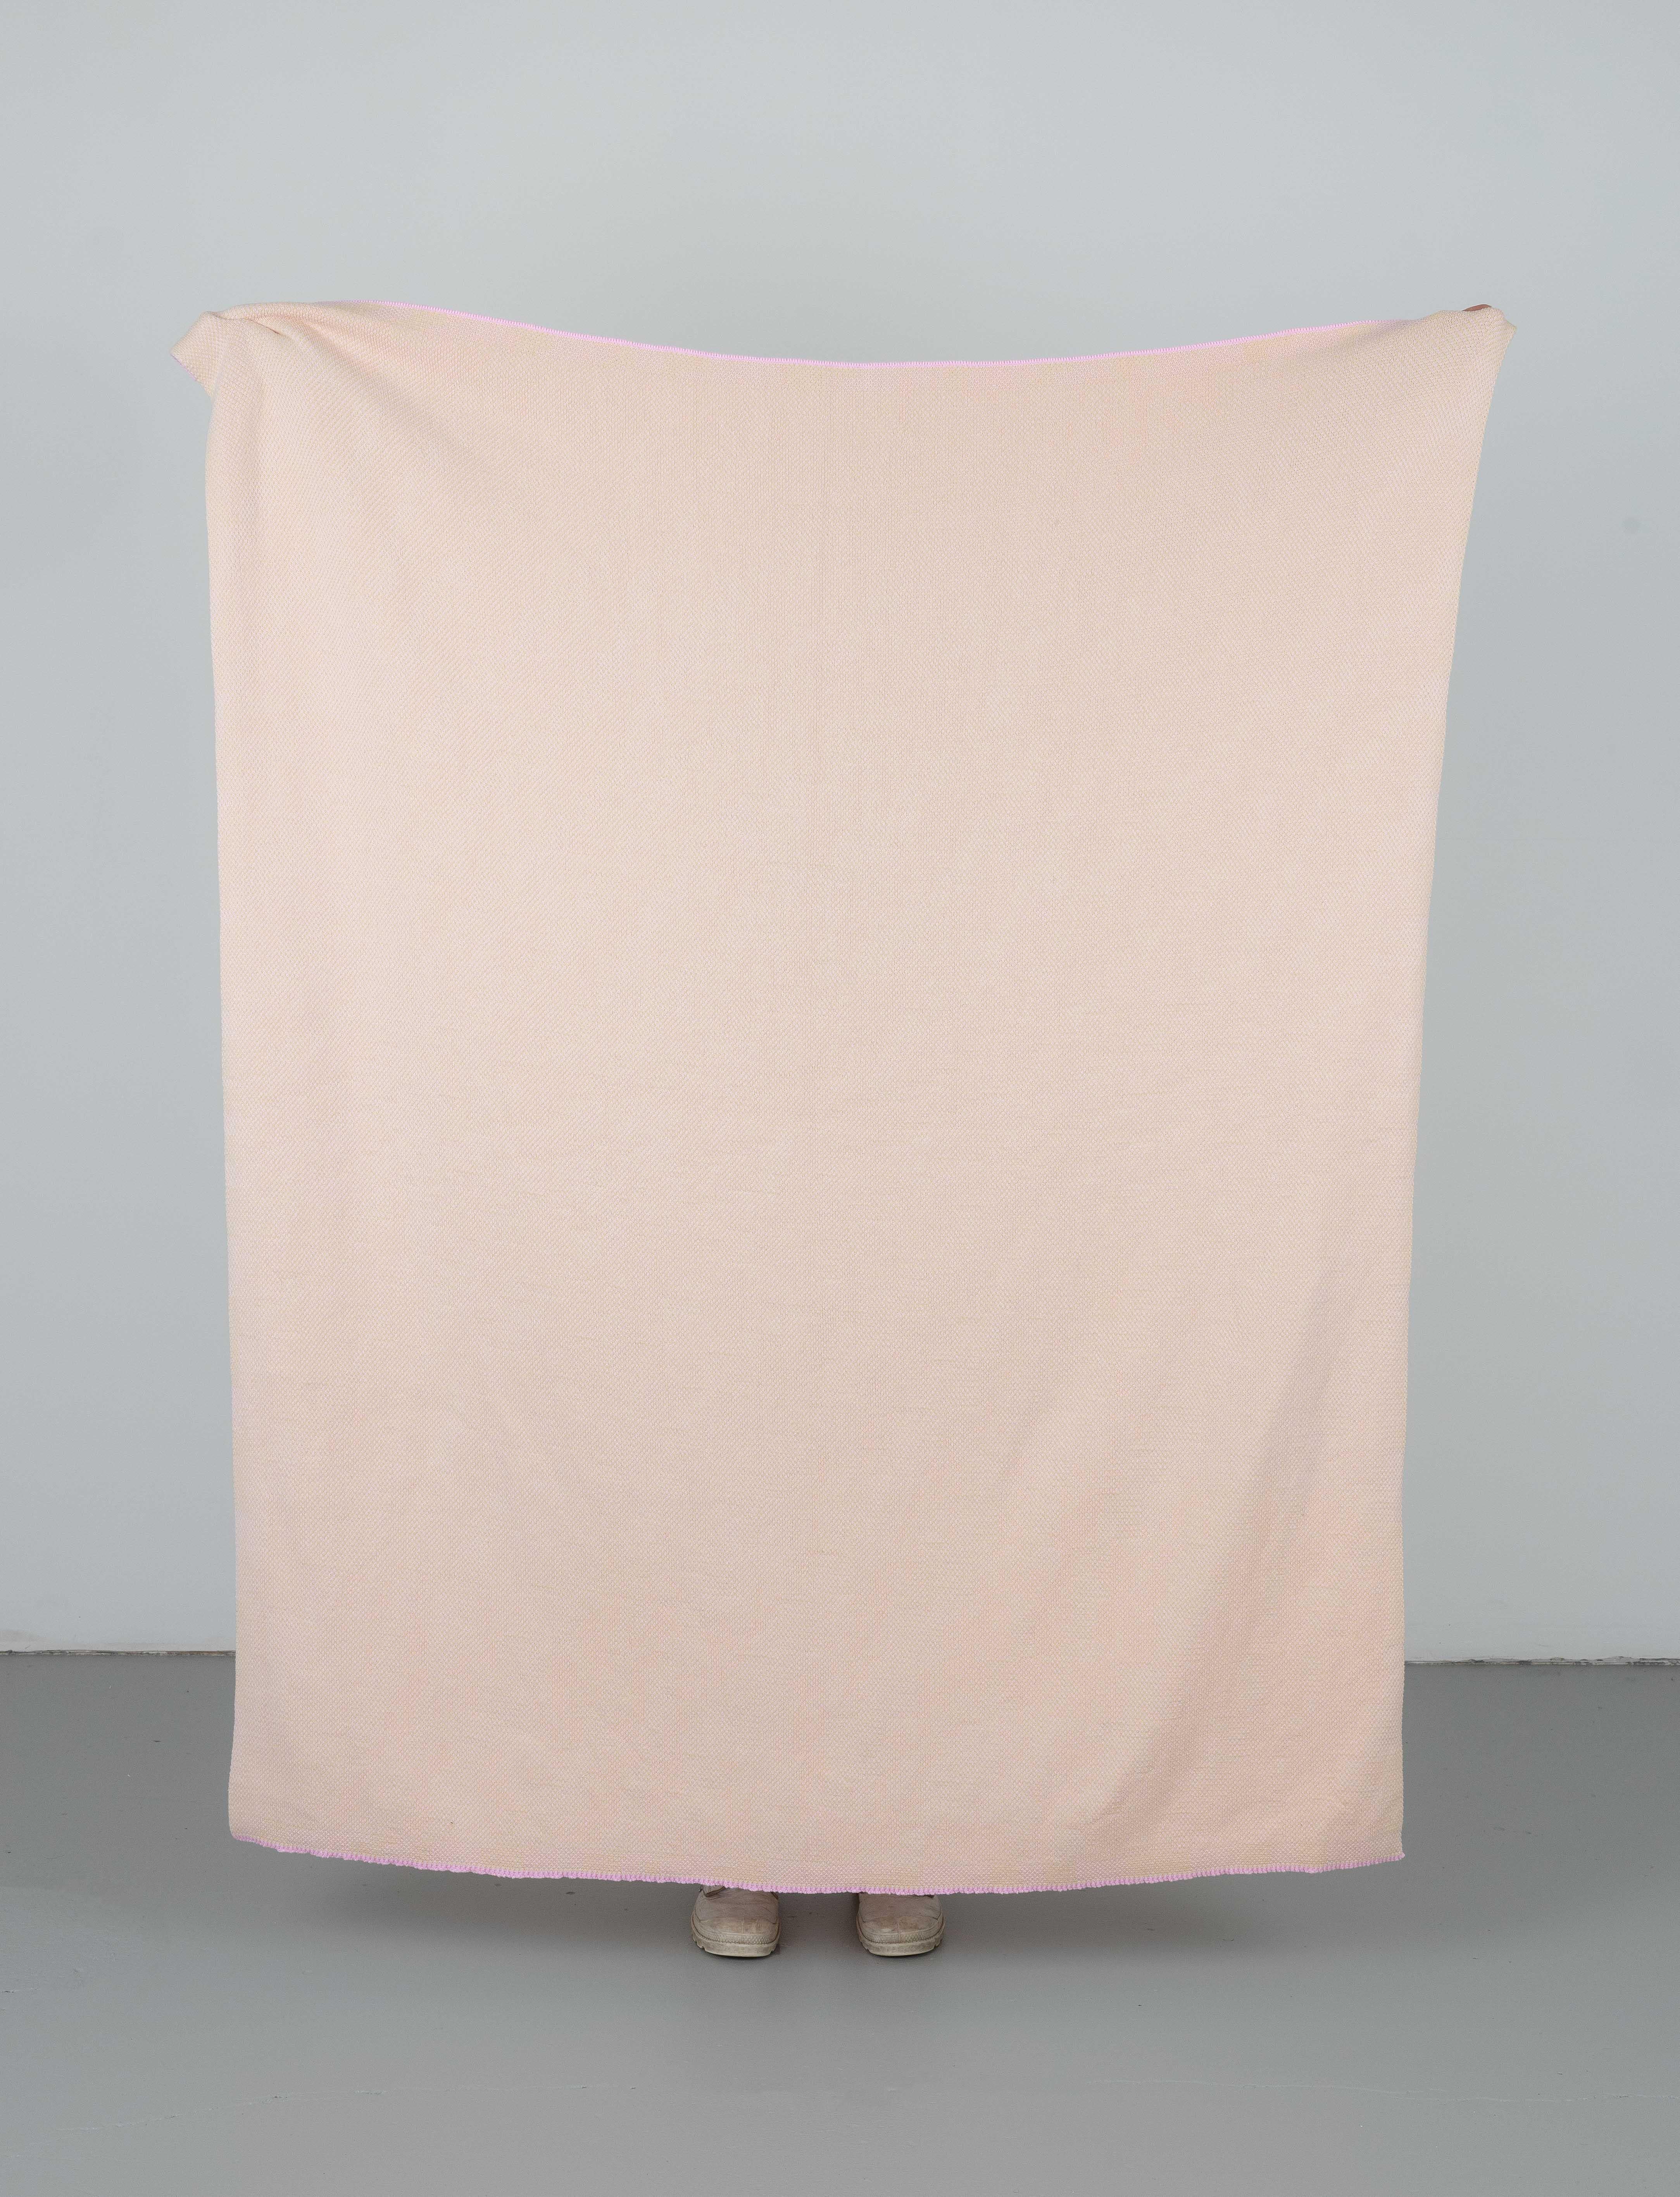 Modern Billowing Twill Knit Throw Blanket Textile in Rose Pink and Yellow For Sale